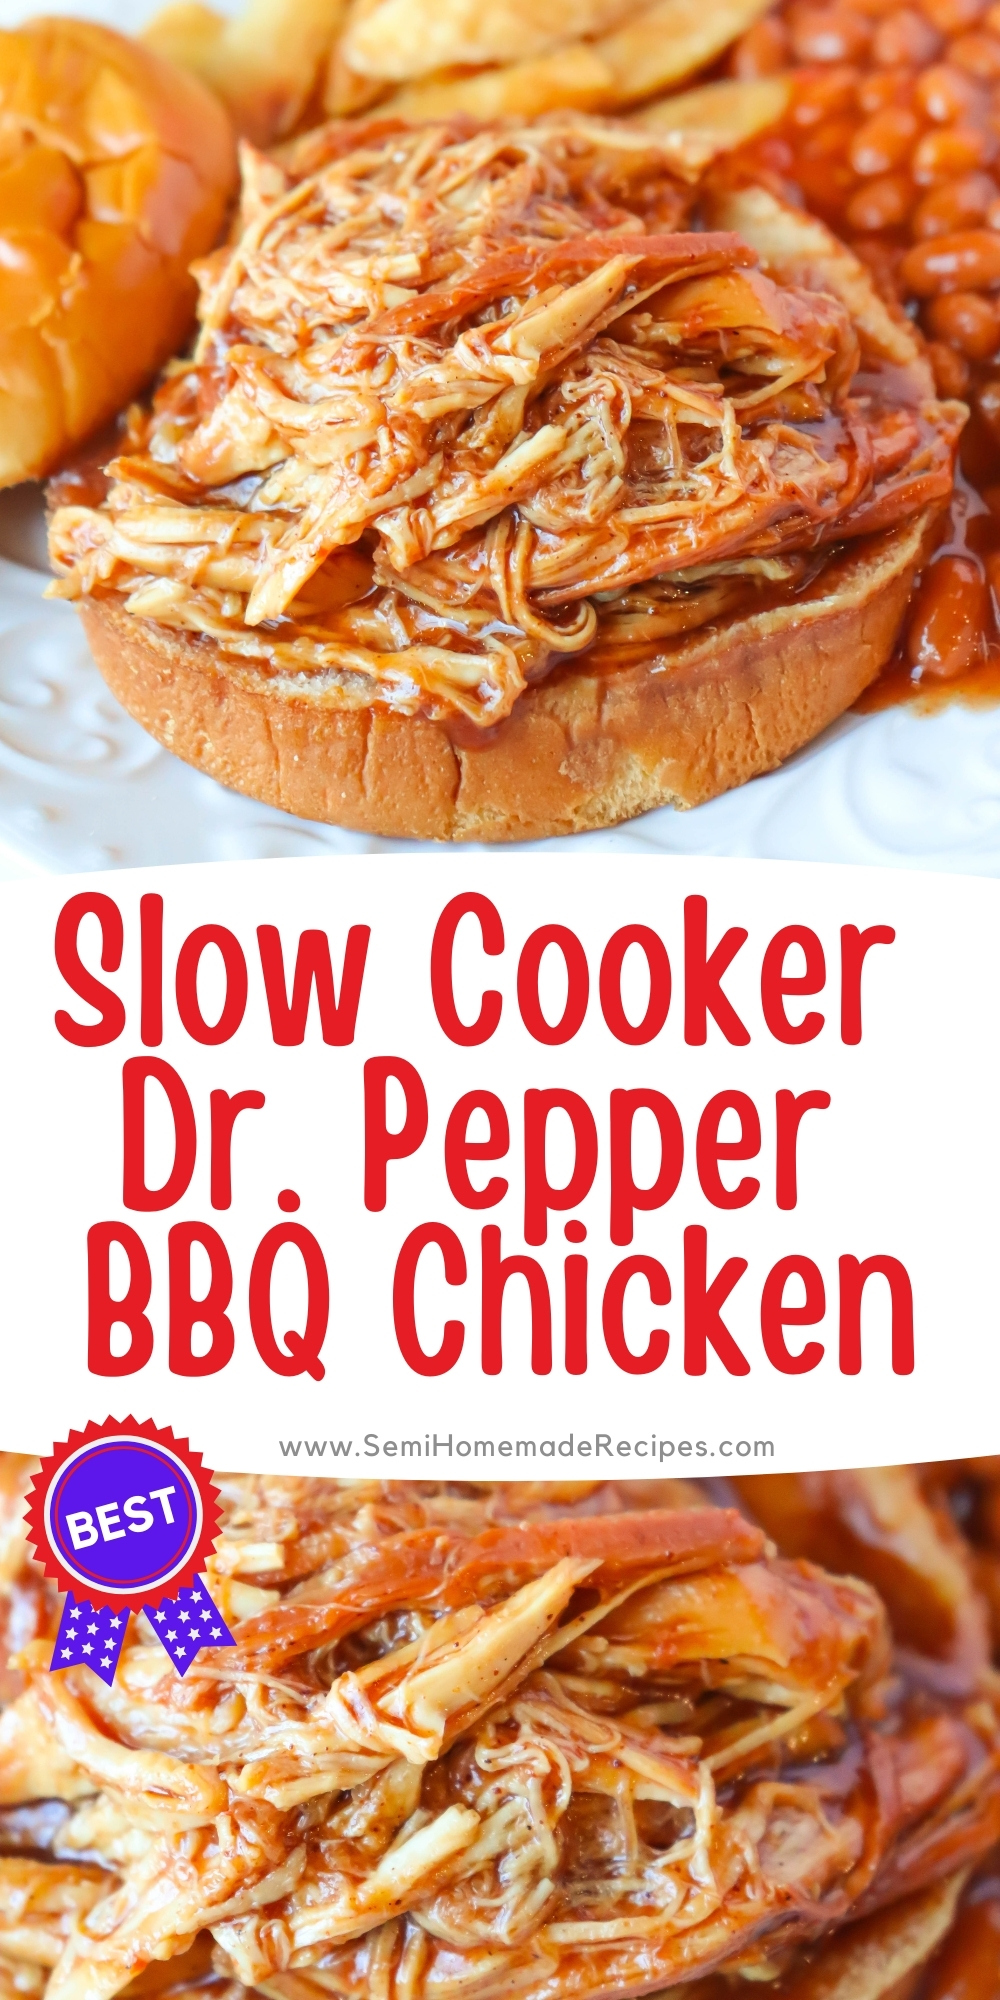 This Slow Cooker Dr. Pepper BBQ Chicken is so easy to make that you'll want to add it to your menu all the time! 3 ingredients and a few hours in the Crockpot is all that stands between you and a delicious meal! This Slow Cooker Dr. Pepper BBQ Chicken is perfect on its own but even better as a BBQ sandwich on a brioche bun!